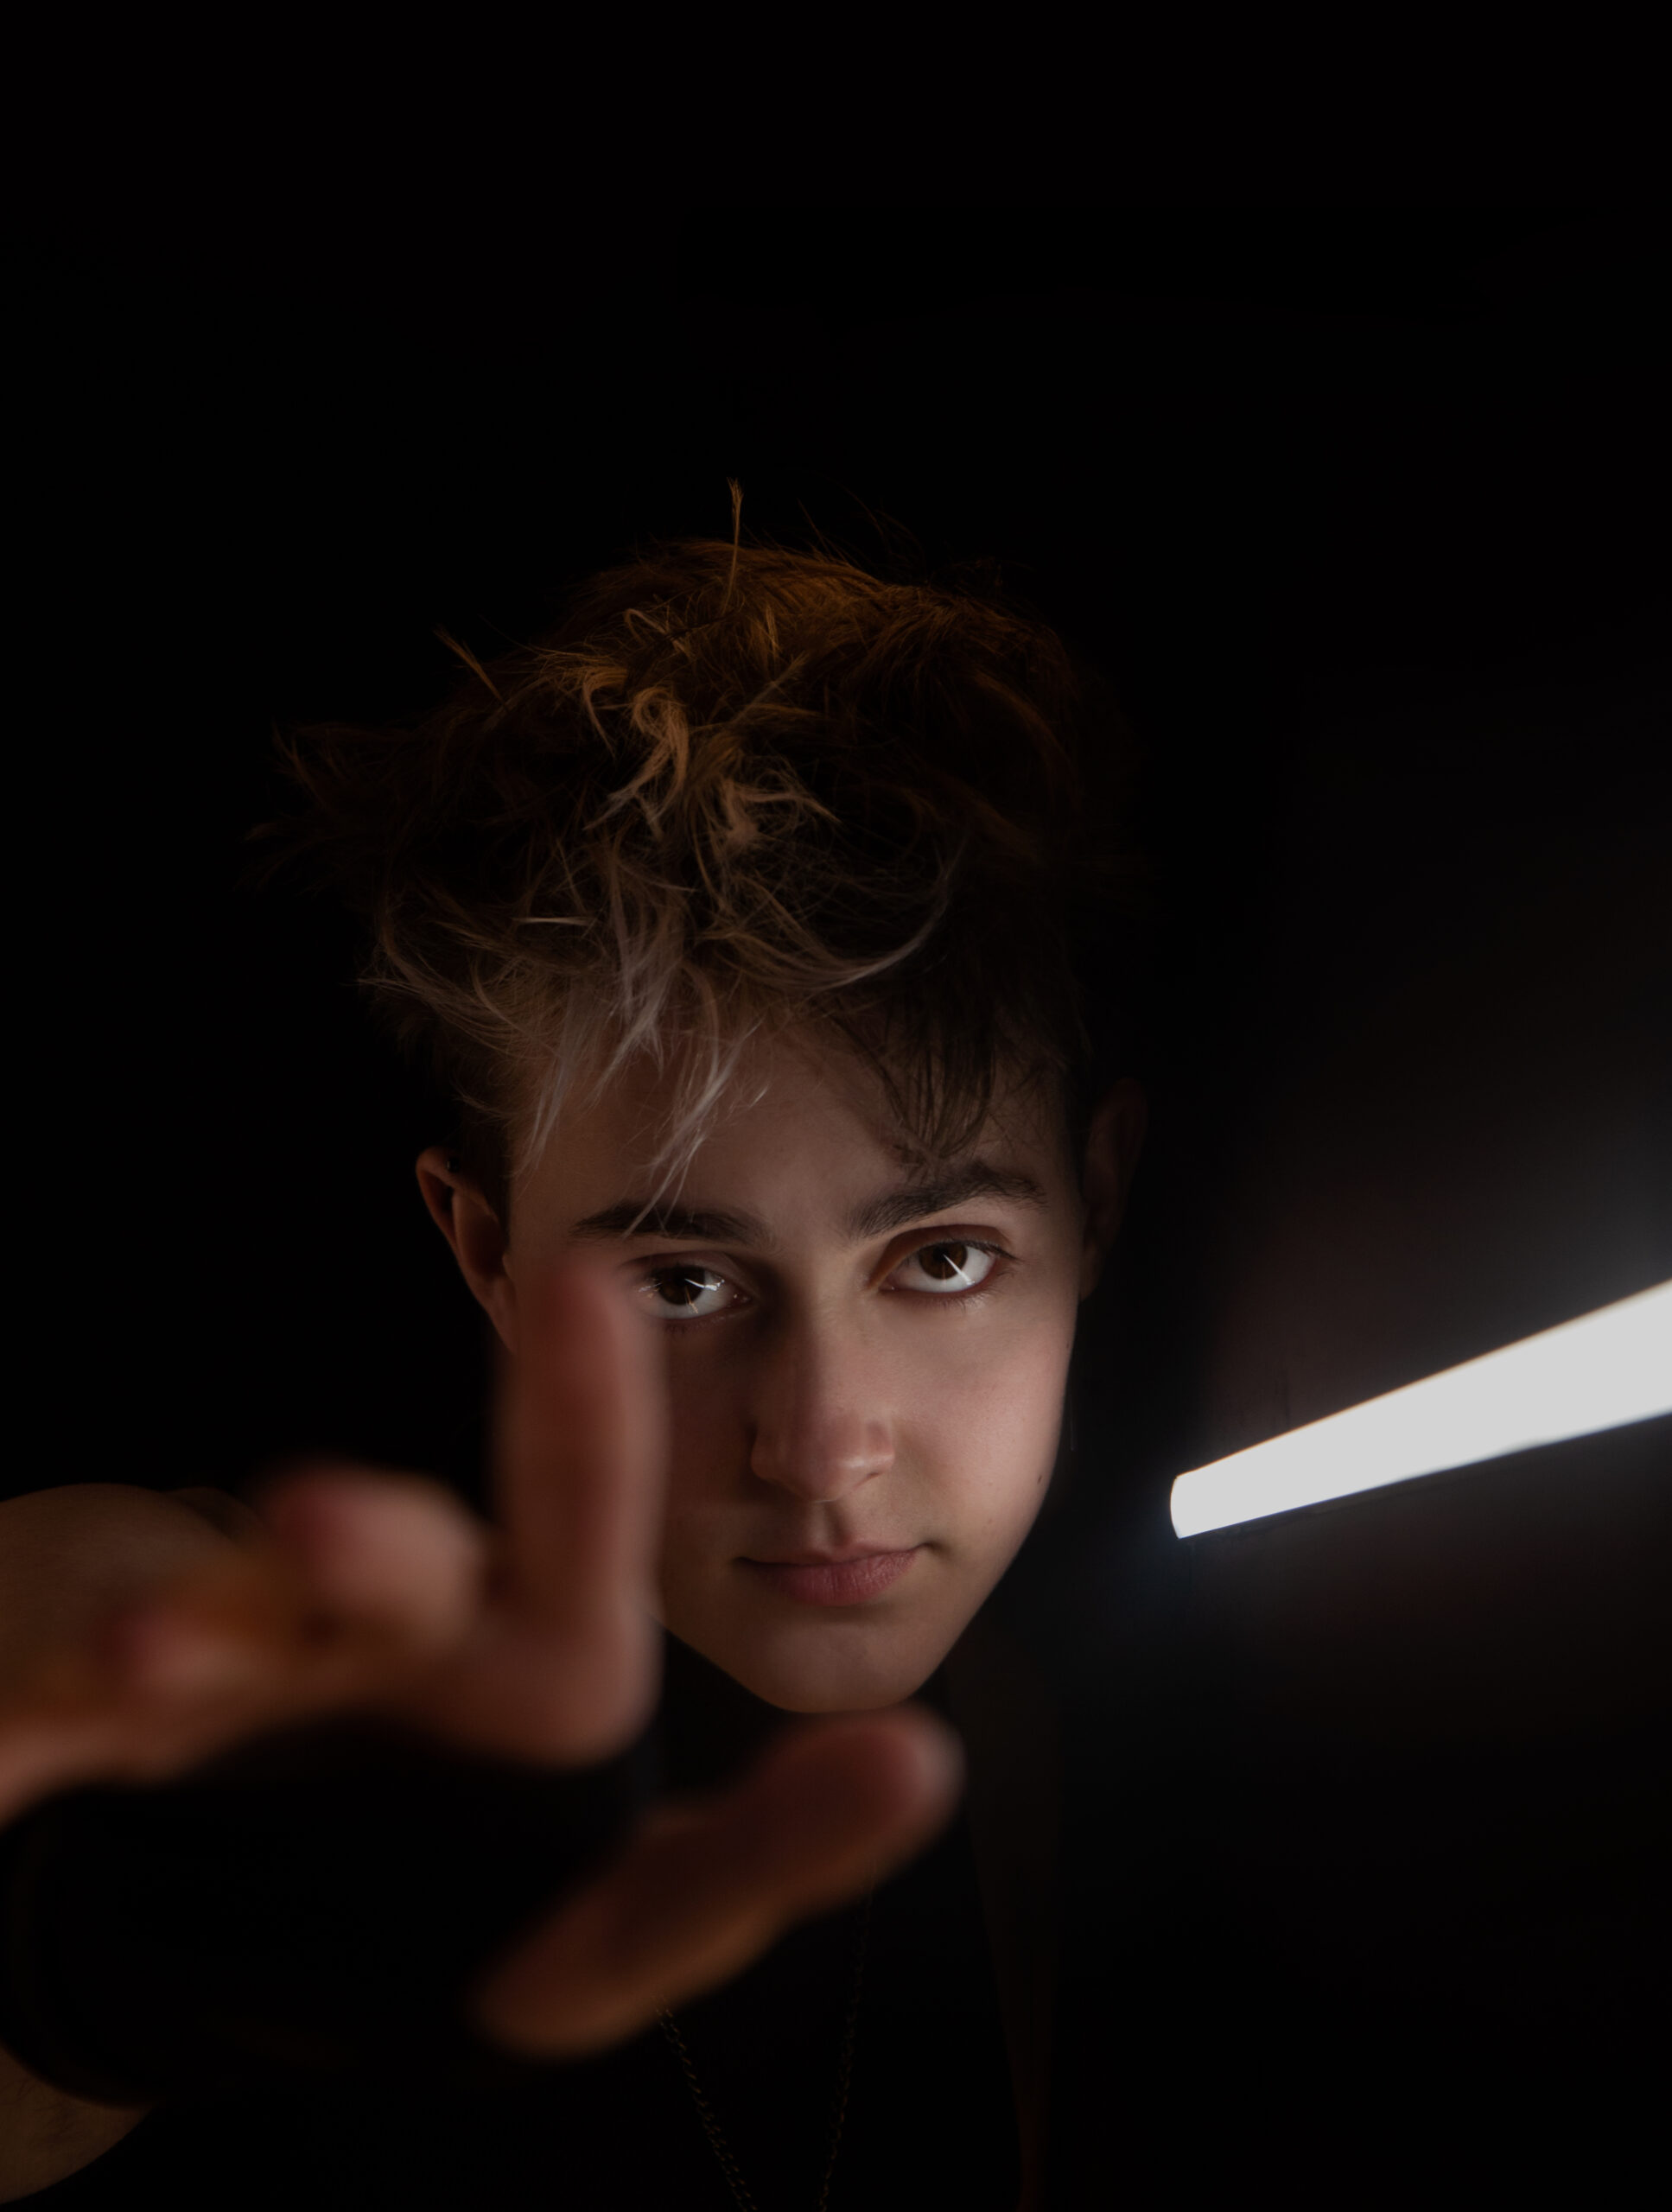 Portrait photography of a man appearing from the dark and holding out a hand illuminated by a single light source